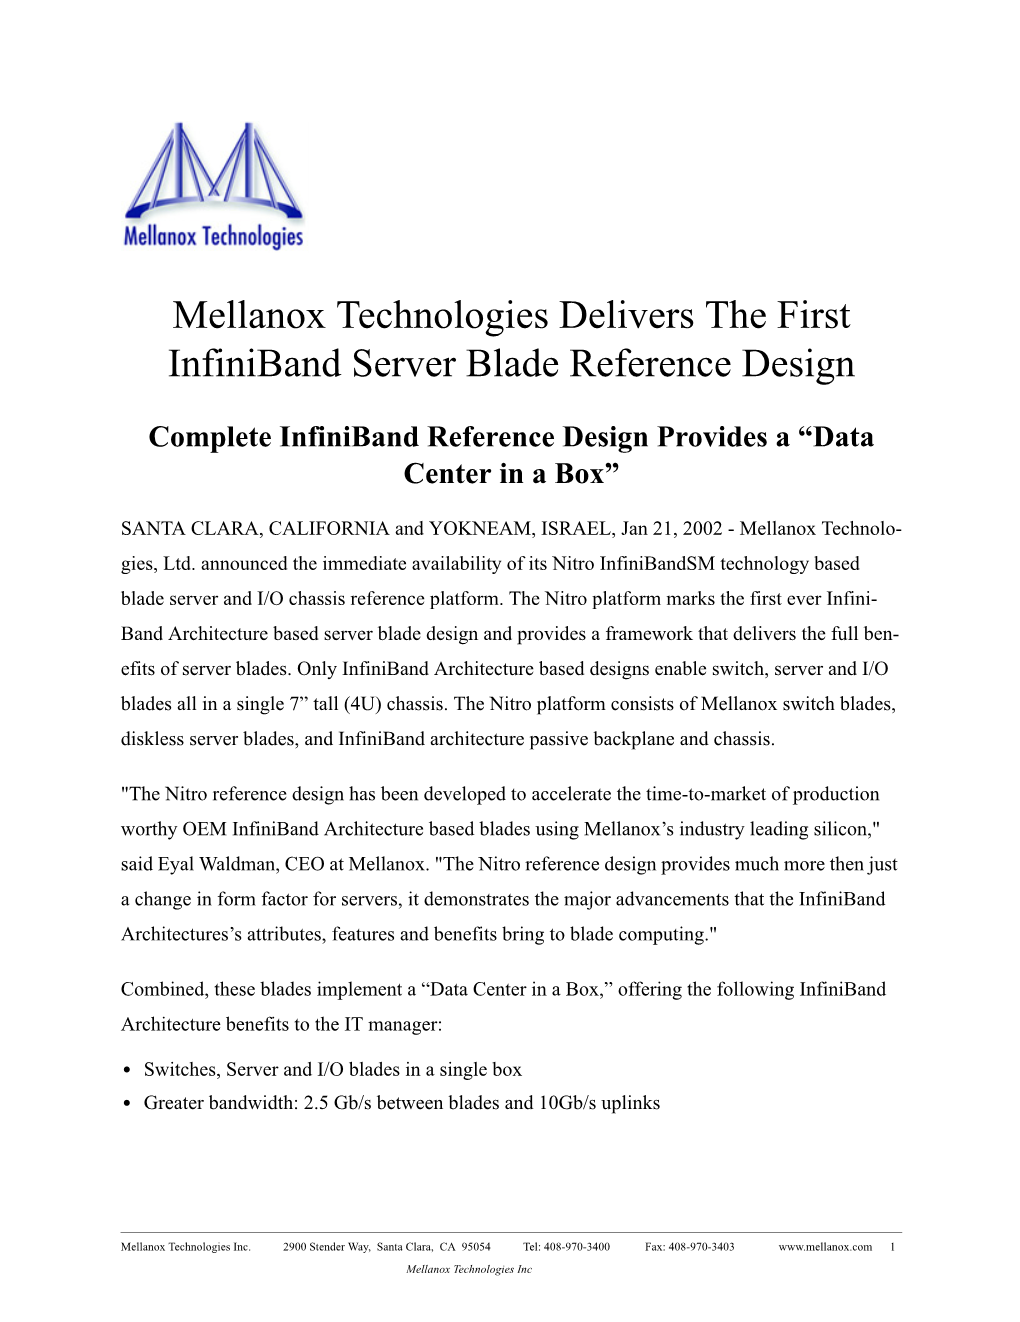 Mellanox Technologies Delivers the First Infiniband Server Blade Reference Design